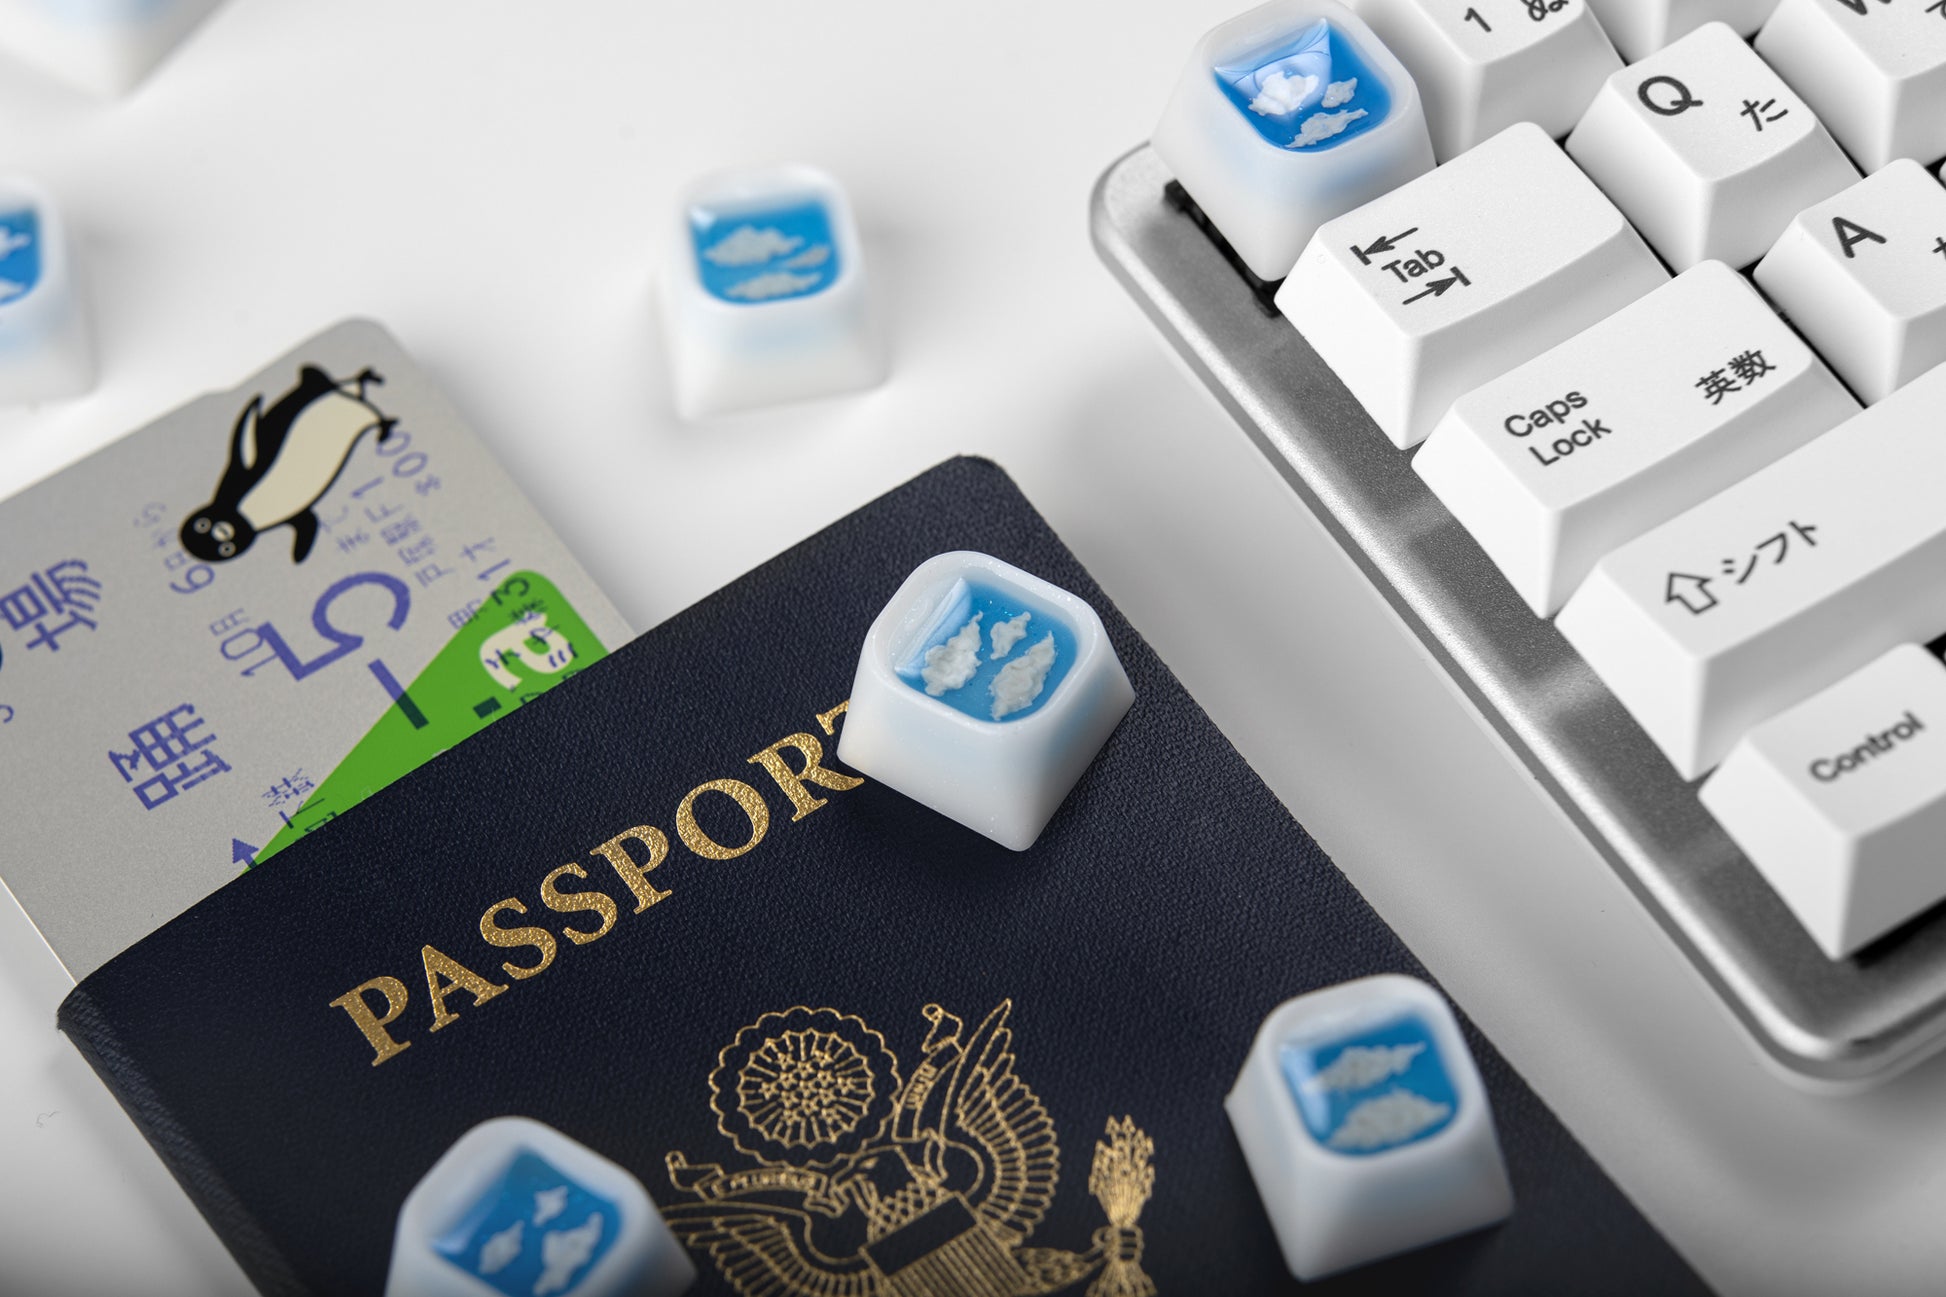 Airplane window artisan keycaps shown sitting on a passport, keyboard on right side of image